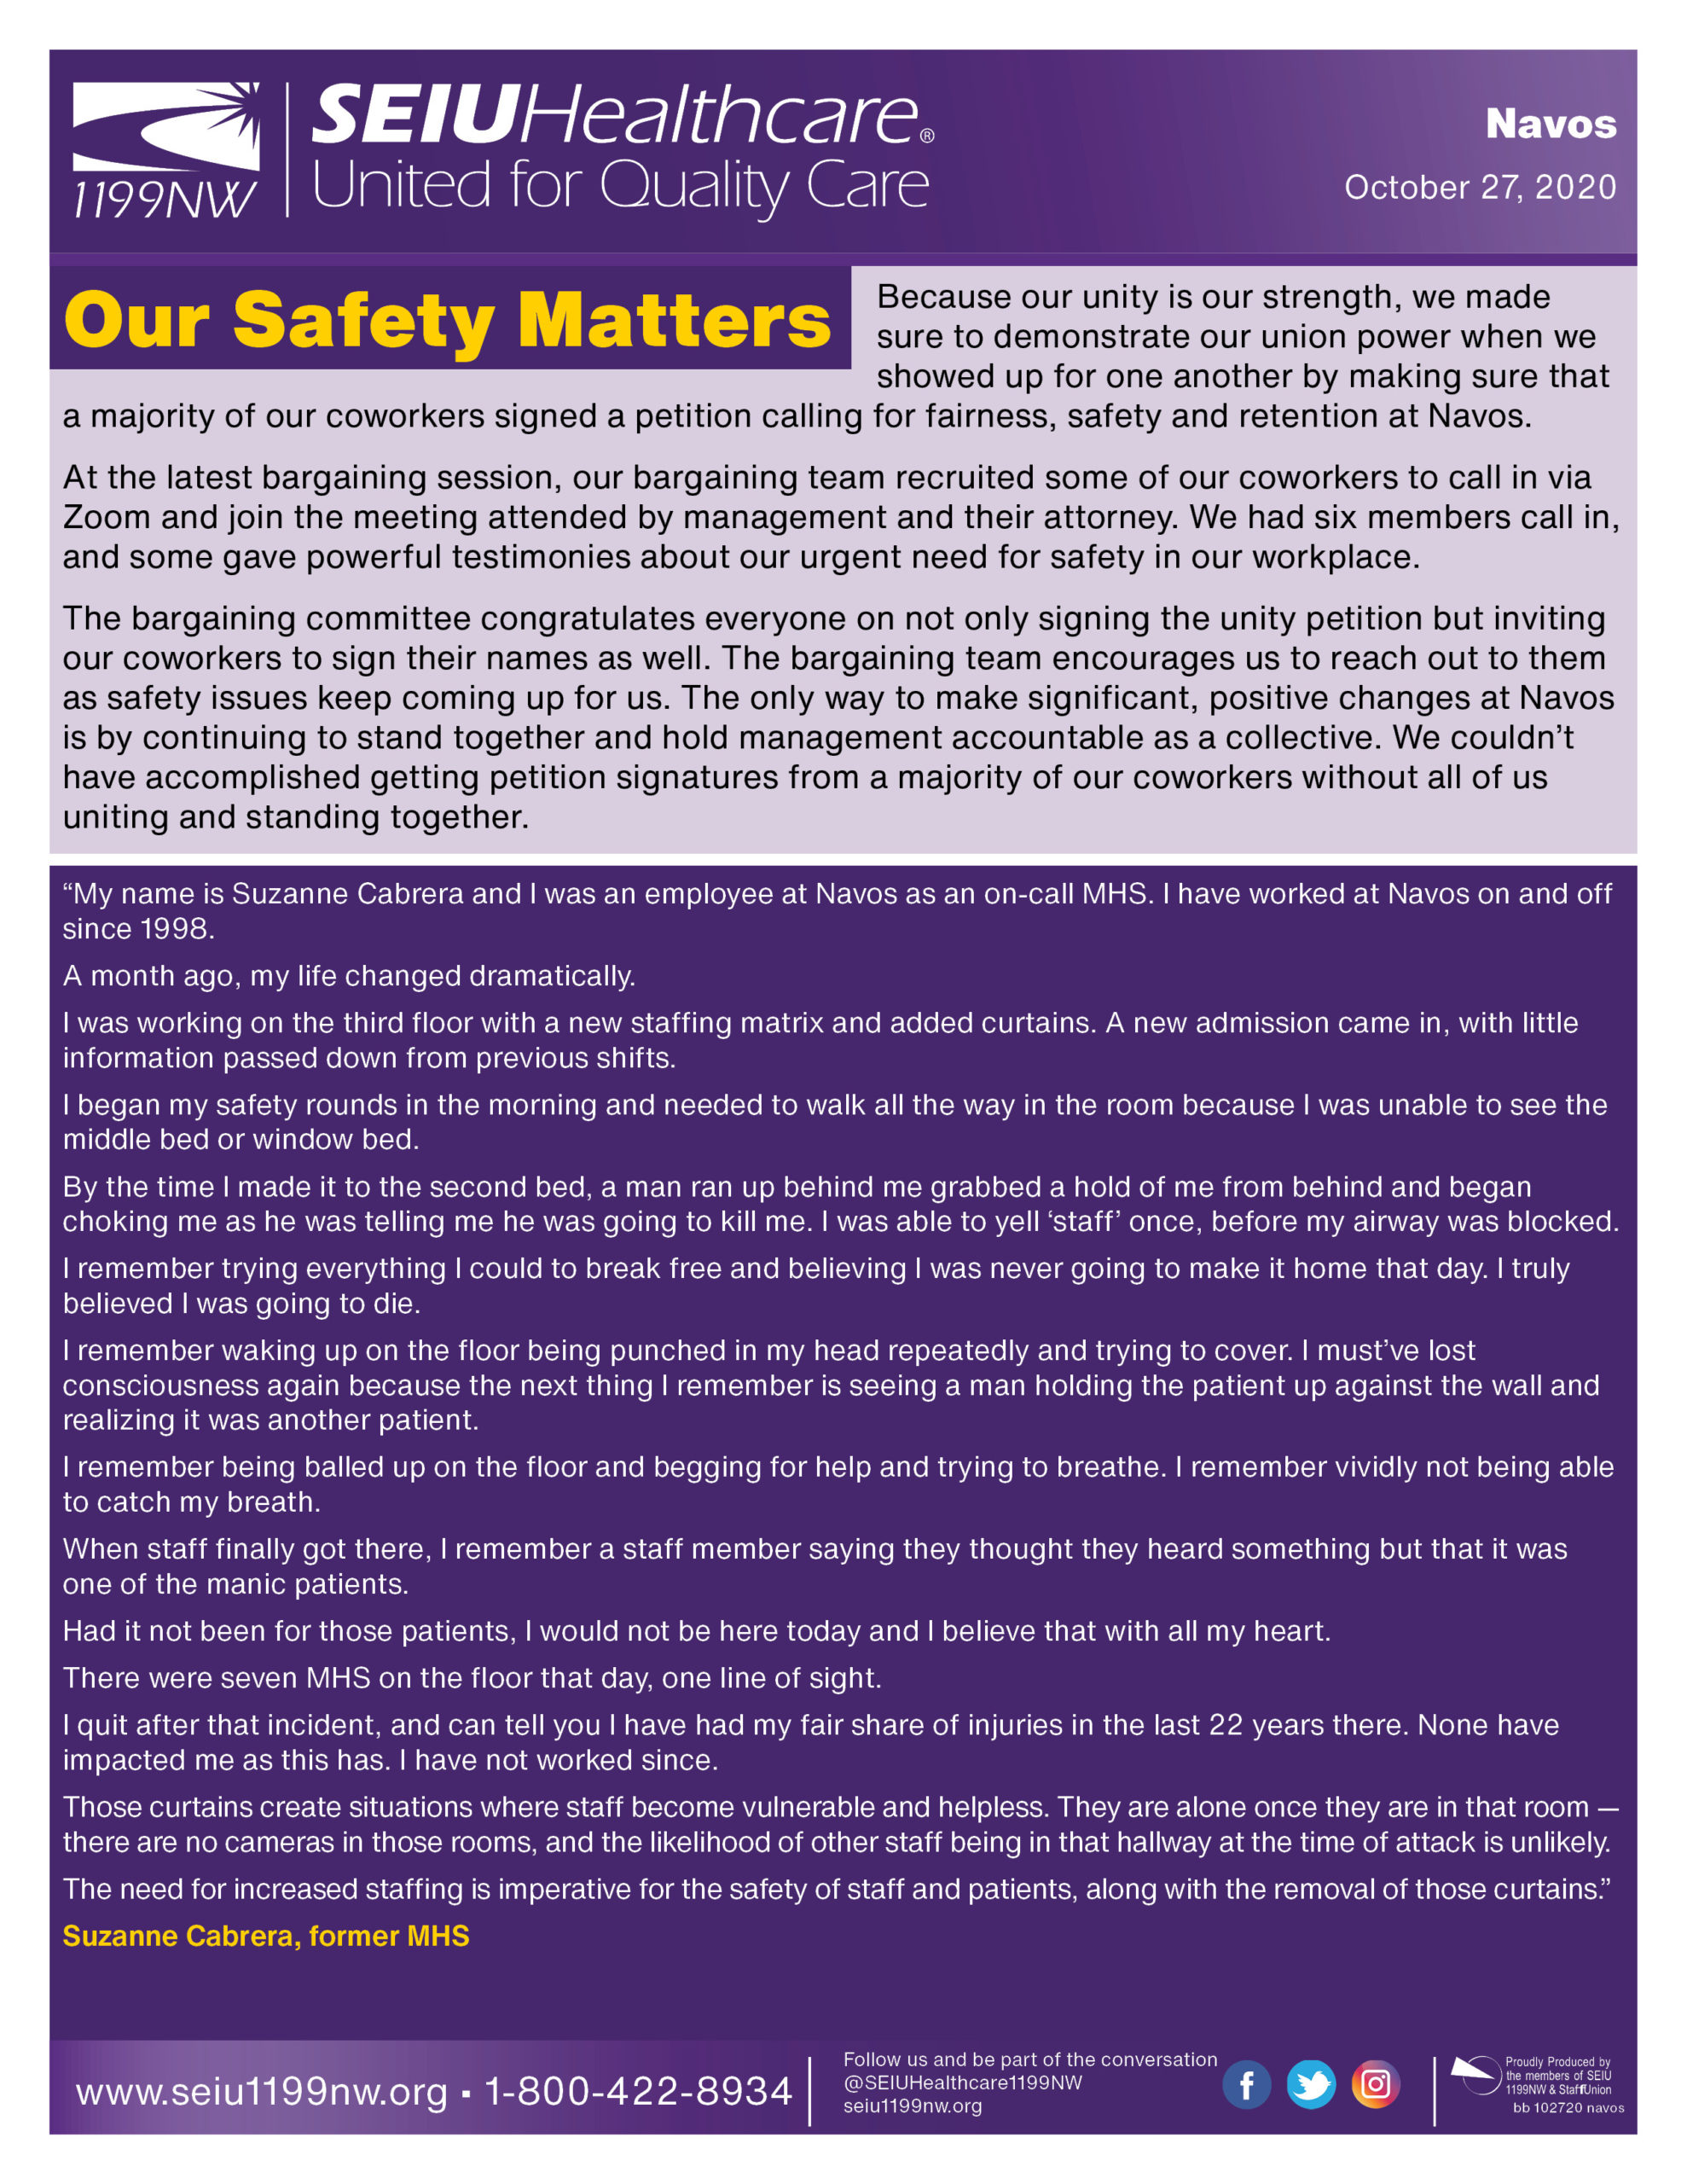 Our Safety Matters